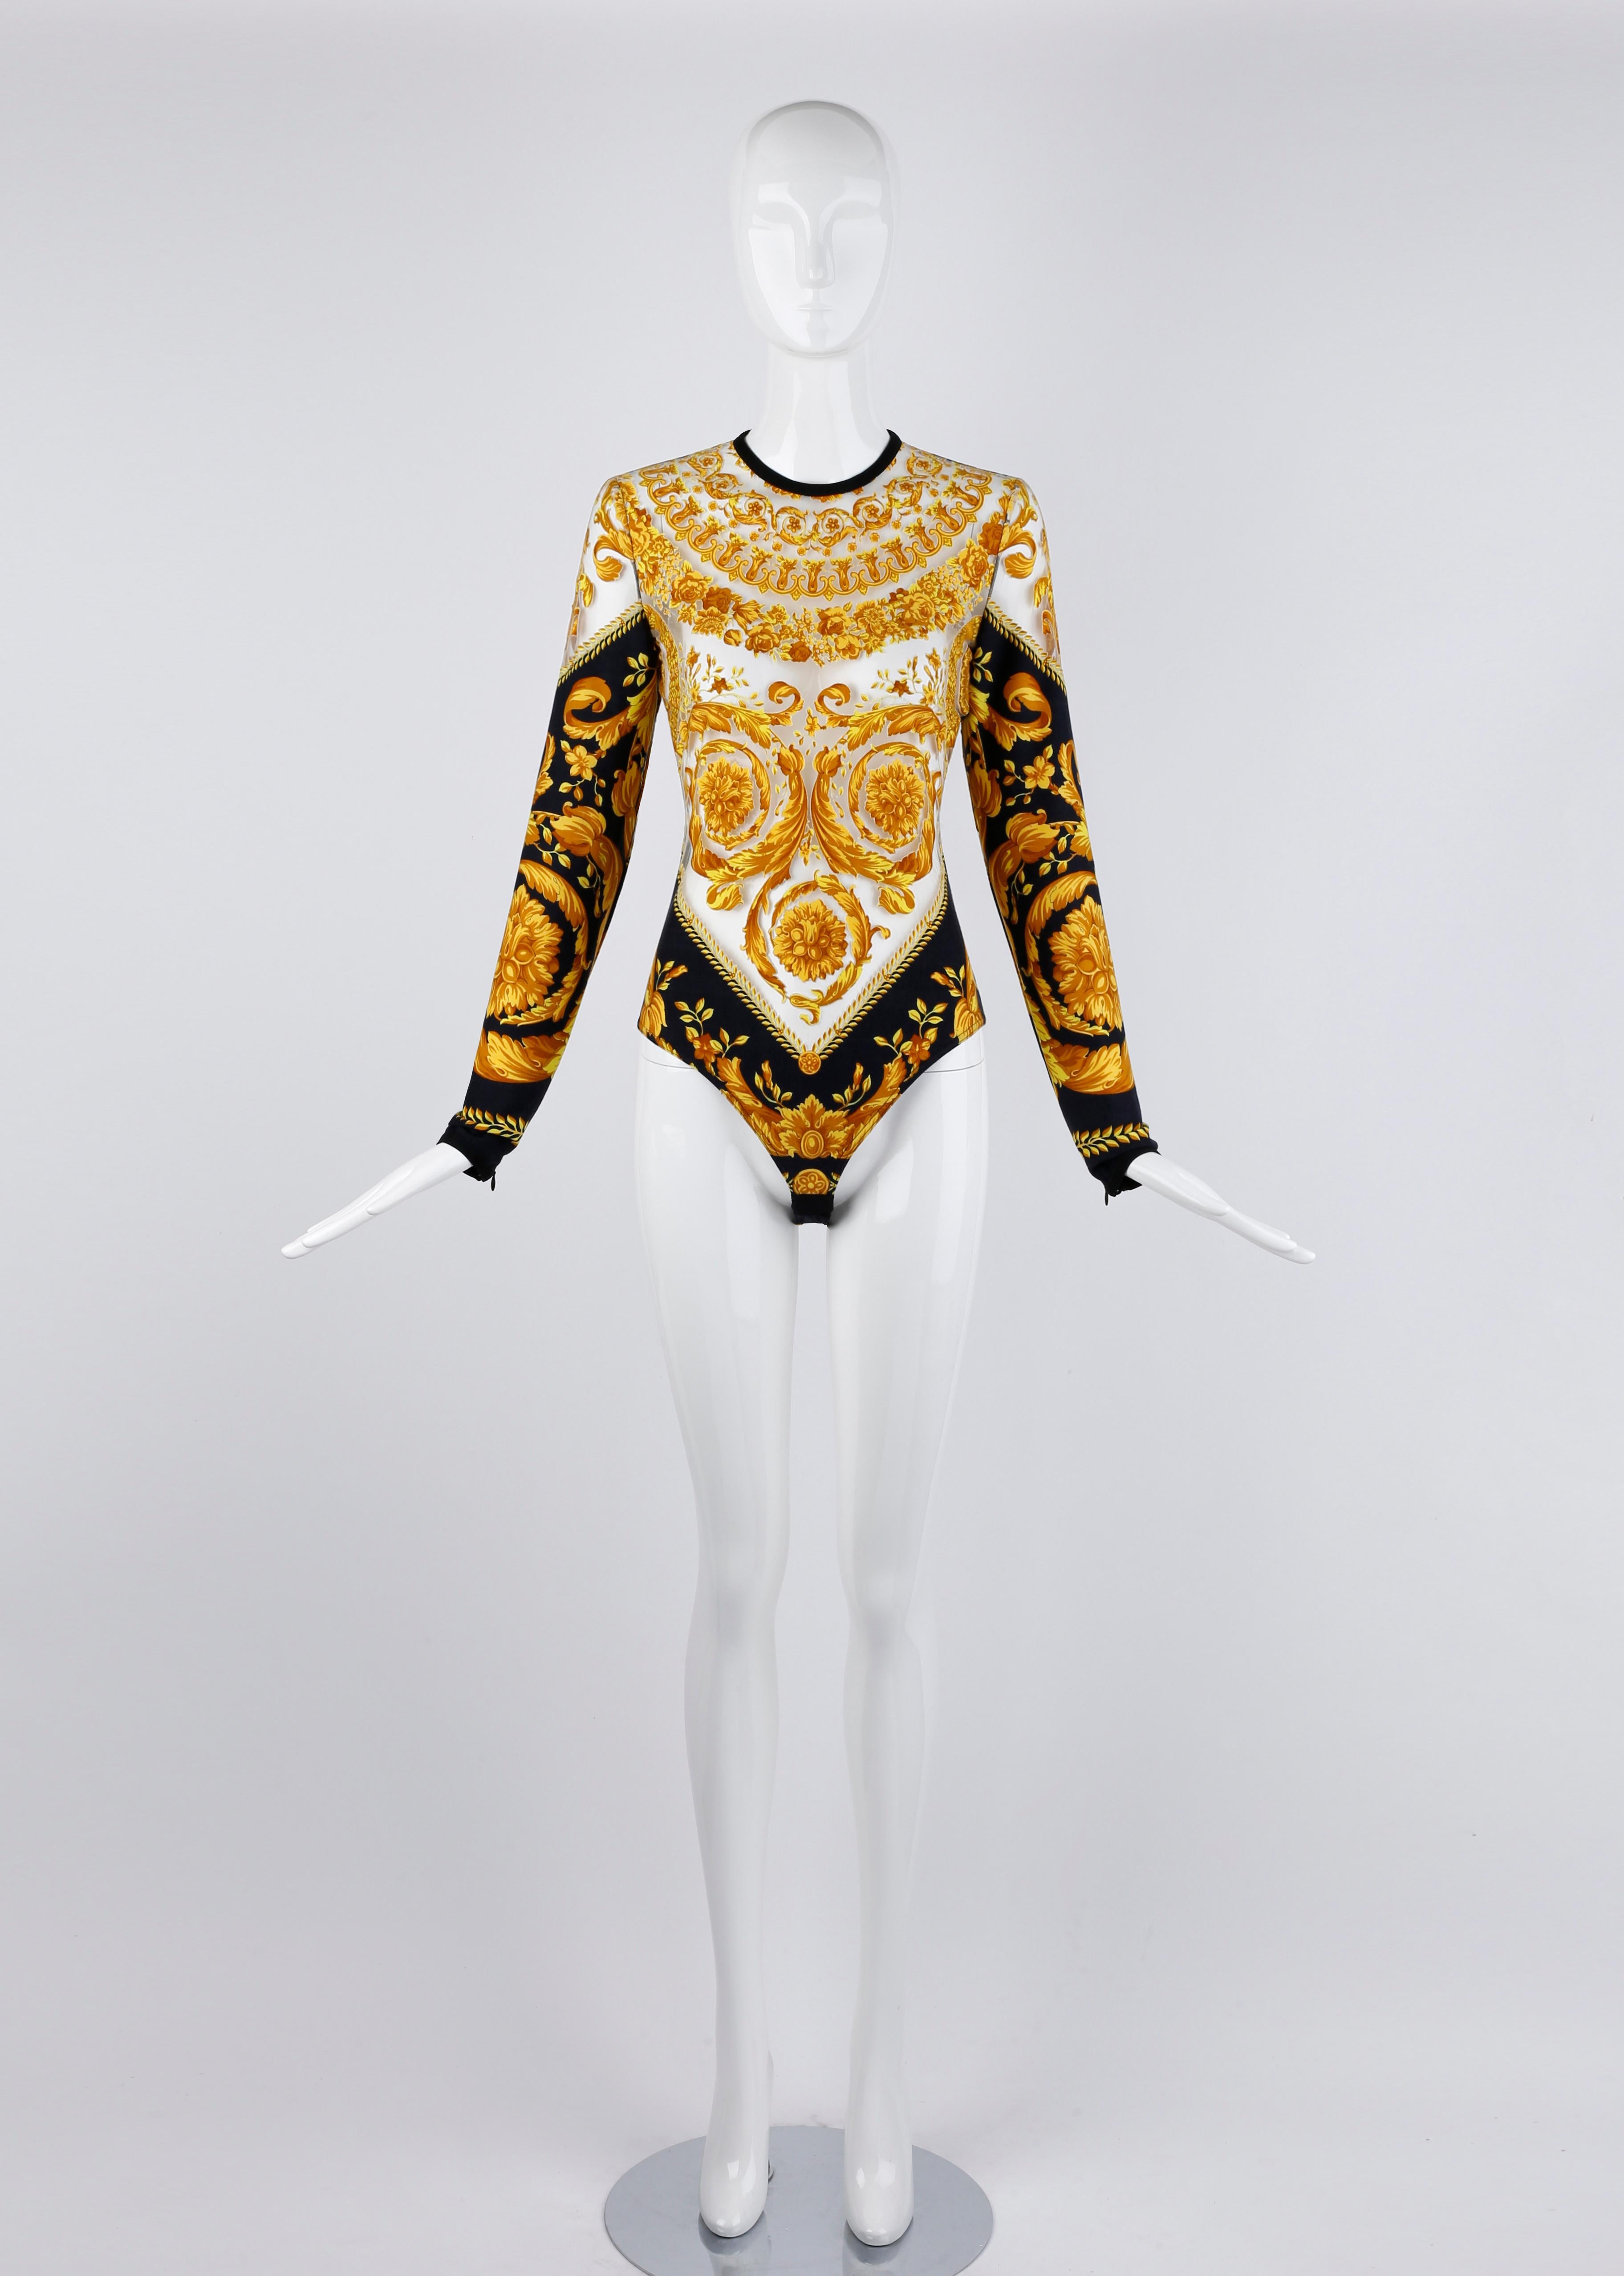 From Gianni Versace’s Spring/Summer 1994 collection. This rare bodysuit features a rich and dynamic signature baroque print in a figure enhancing layout. Baroque print embedded into a mesh fabric at front for a semi-sheer floating print illusion